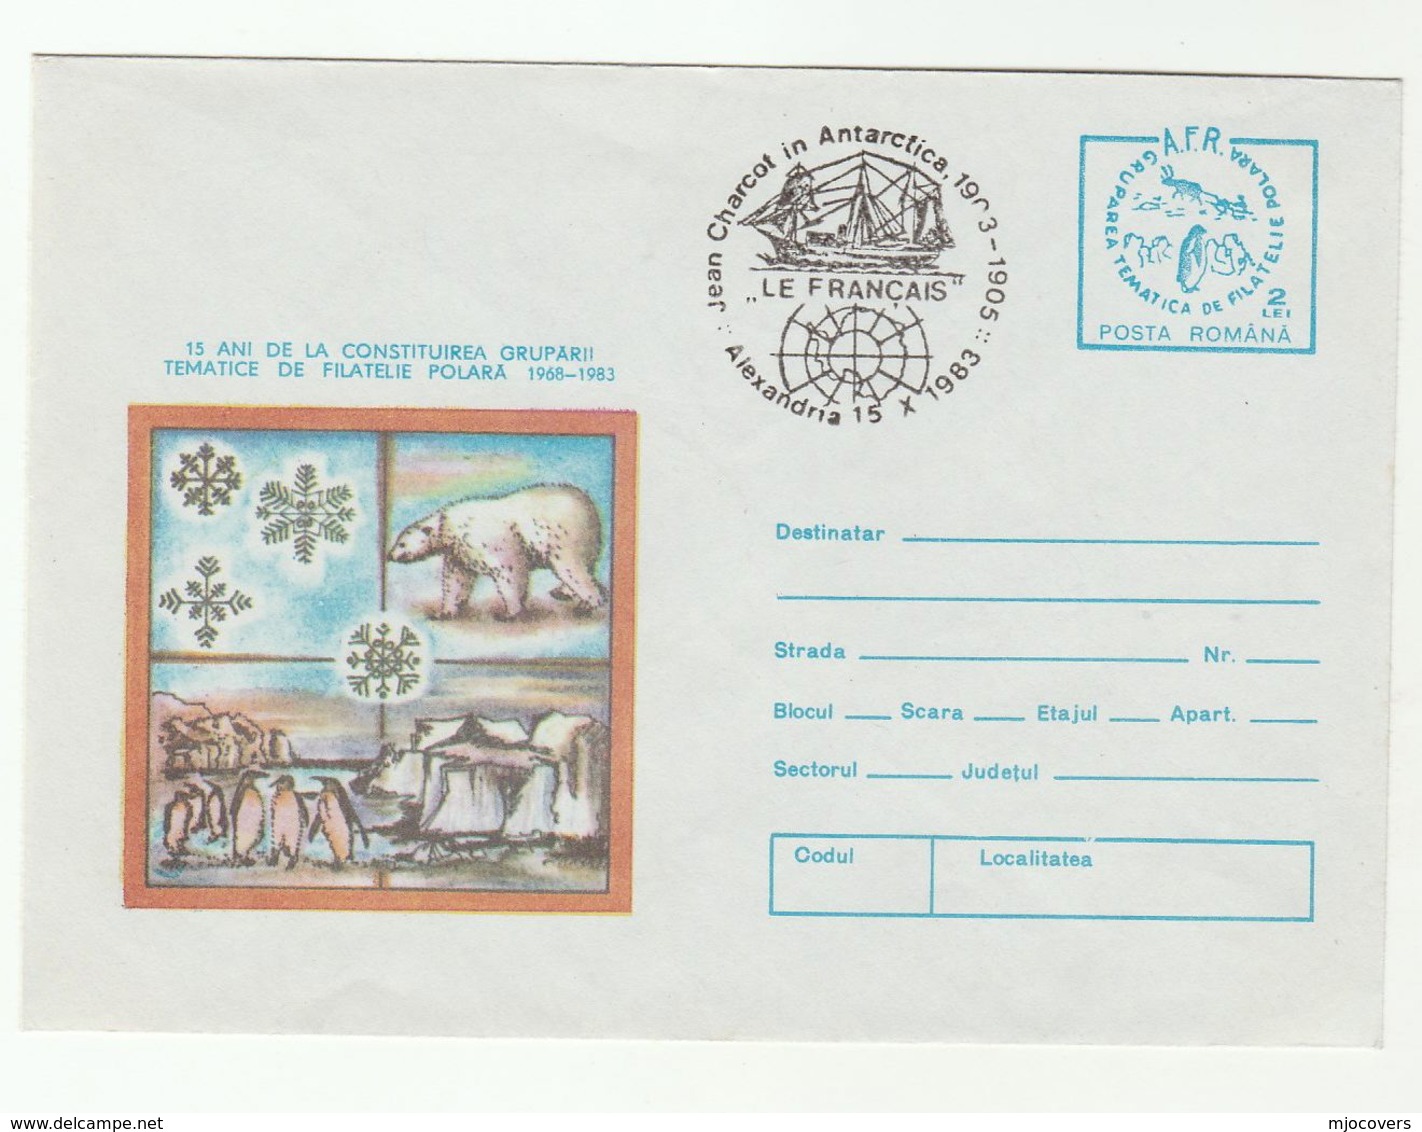 1983 CHARCOT ANTARCTIC EXPEDITION Anniv EVENT COVER Romania Polar Bear Postal Stationery Penguin French Sailing Ship - Antarctic Expeditions